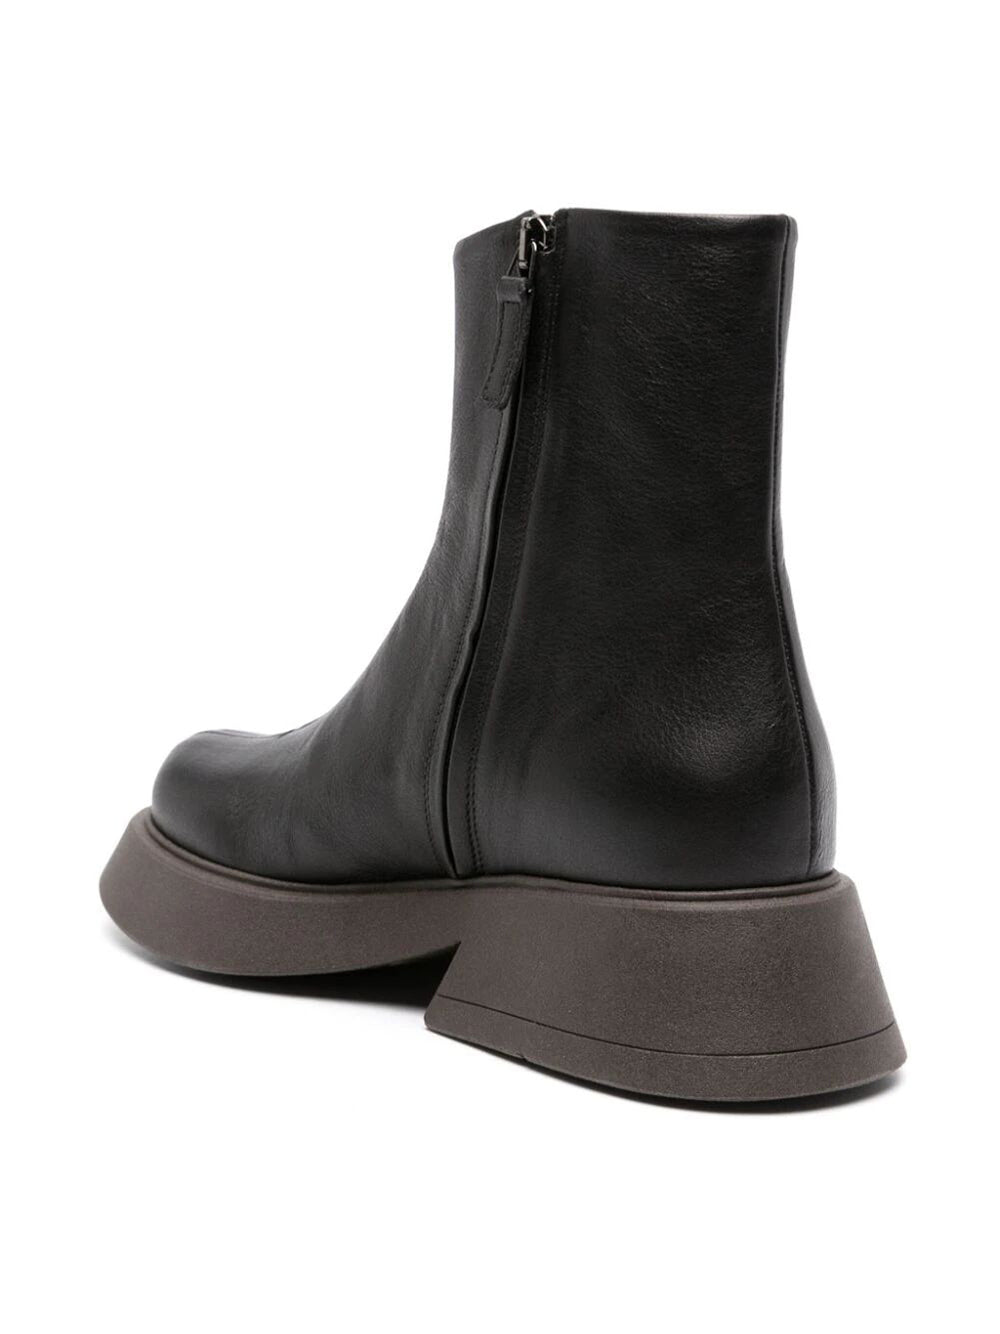 leather ankle boot with central stitching